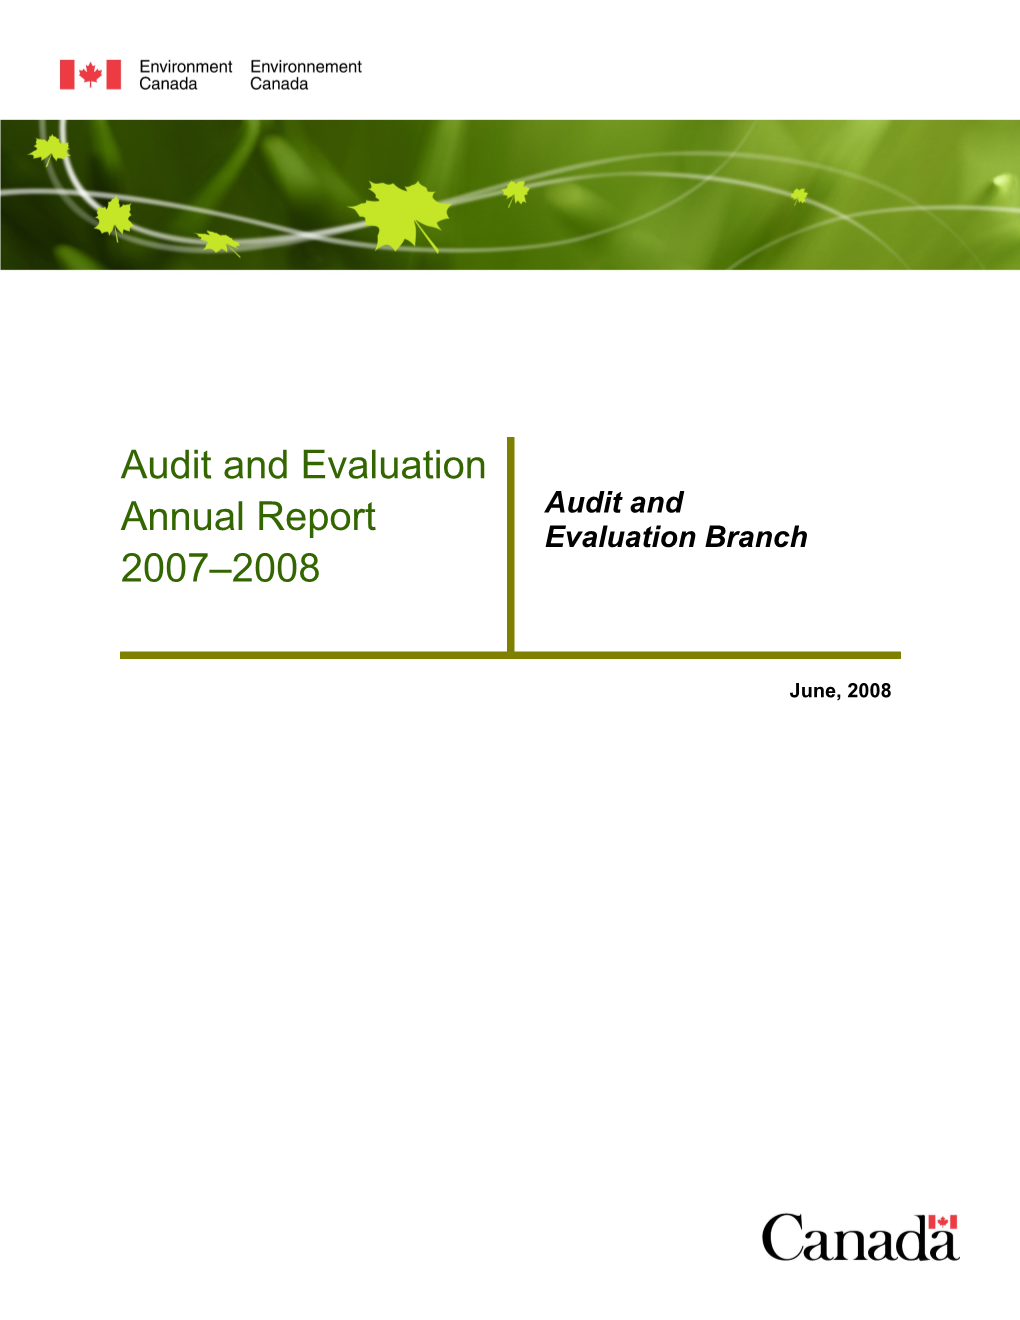 Audit and Evaluation 2007 2008 Annual Report